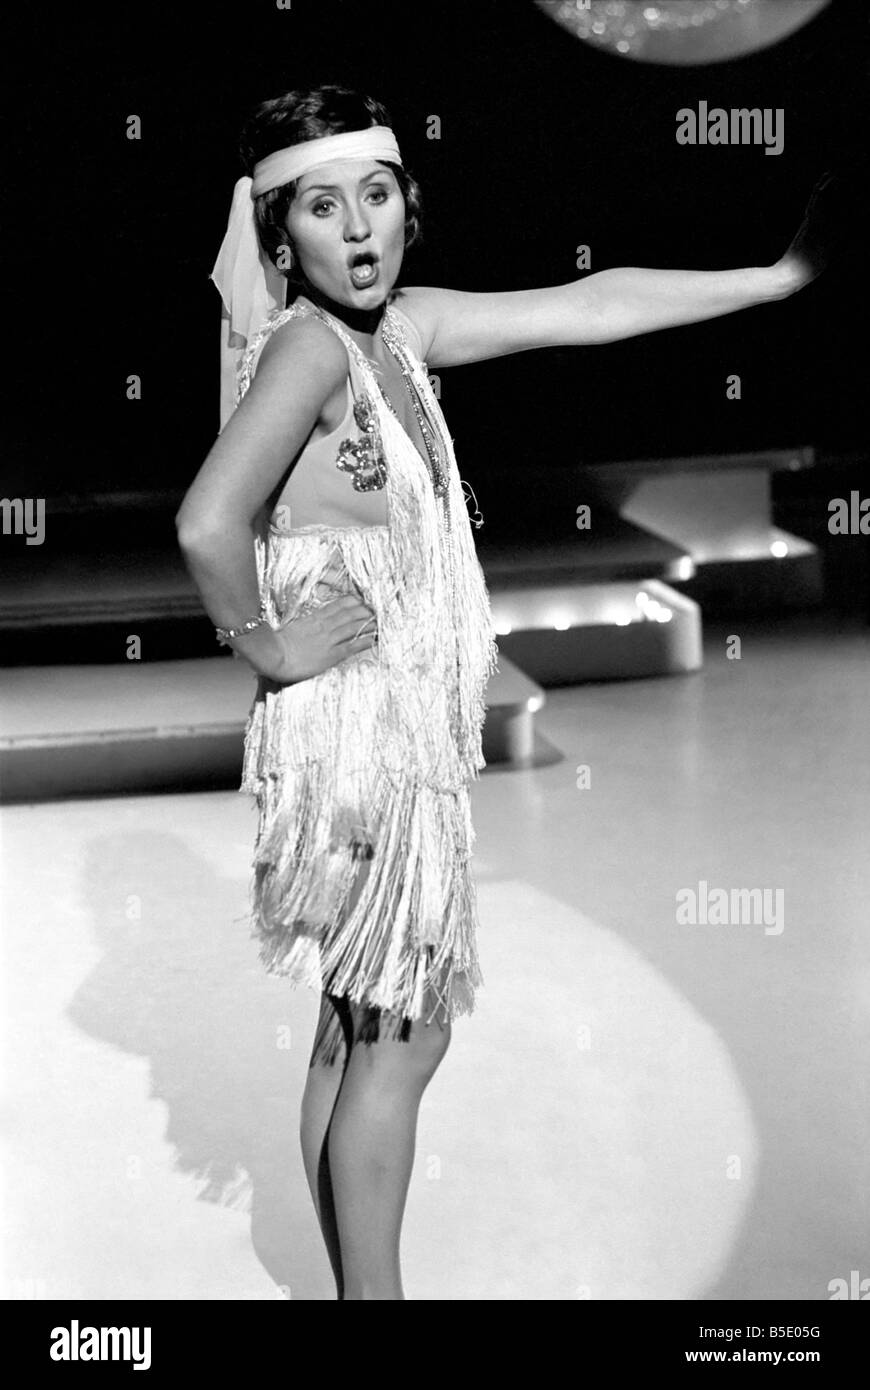 Singer Lulu seen here on the set of her TV show dressed as a 1920s flapper. February 1975 Stock Photo